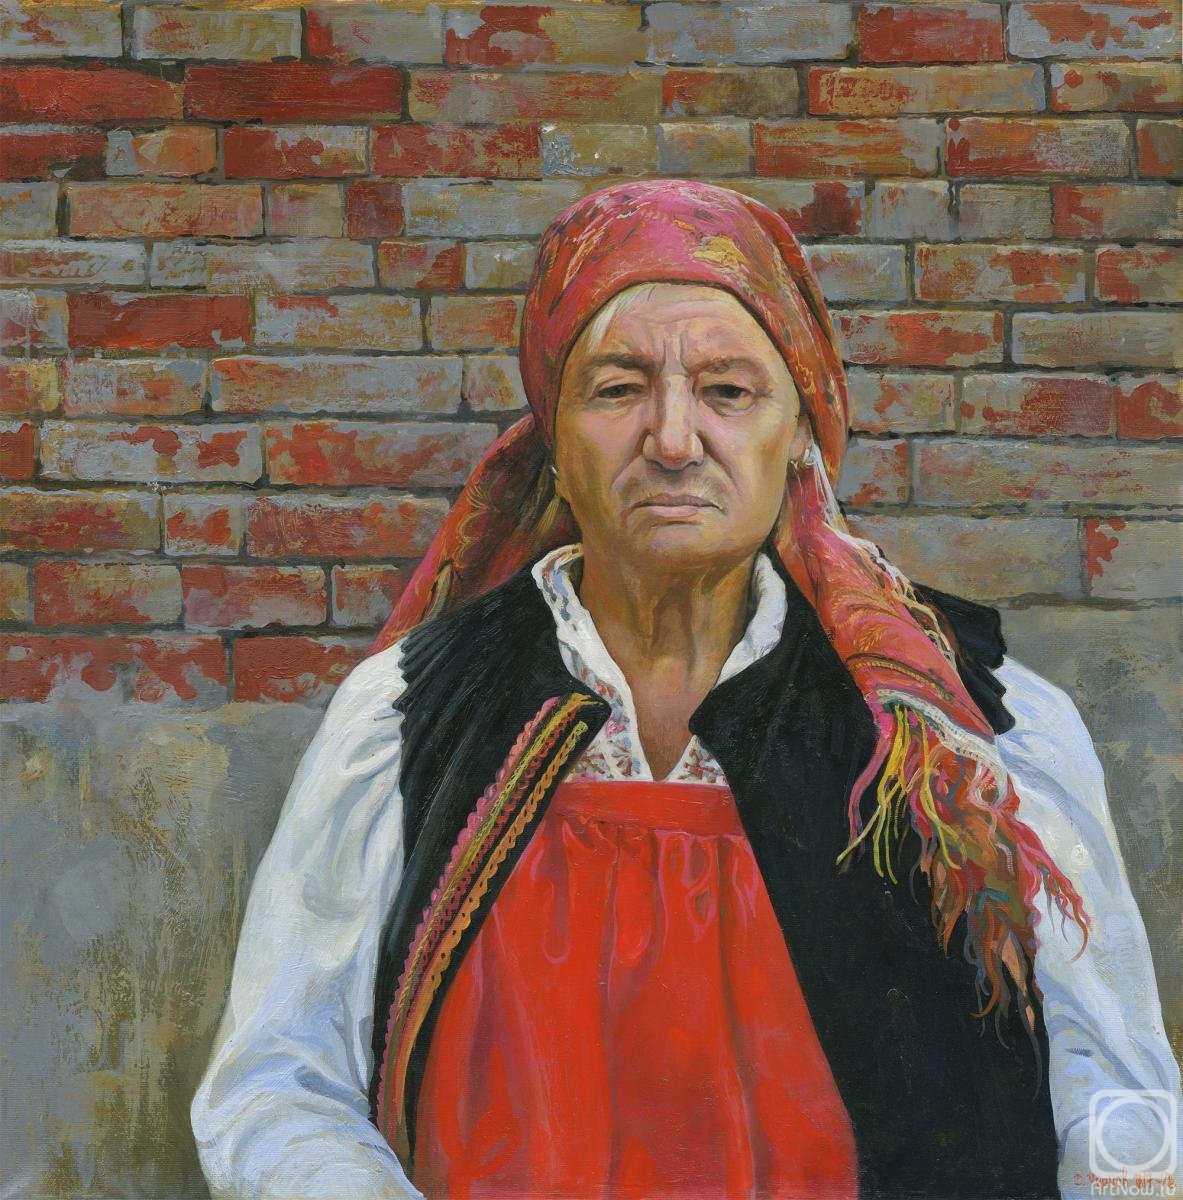 Chernov Denis. Portrait of an Old Woman in National Garment